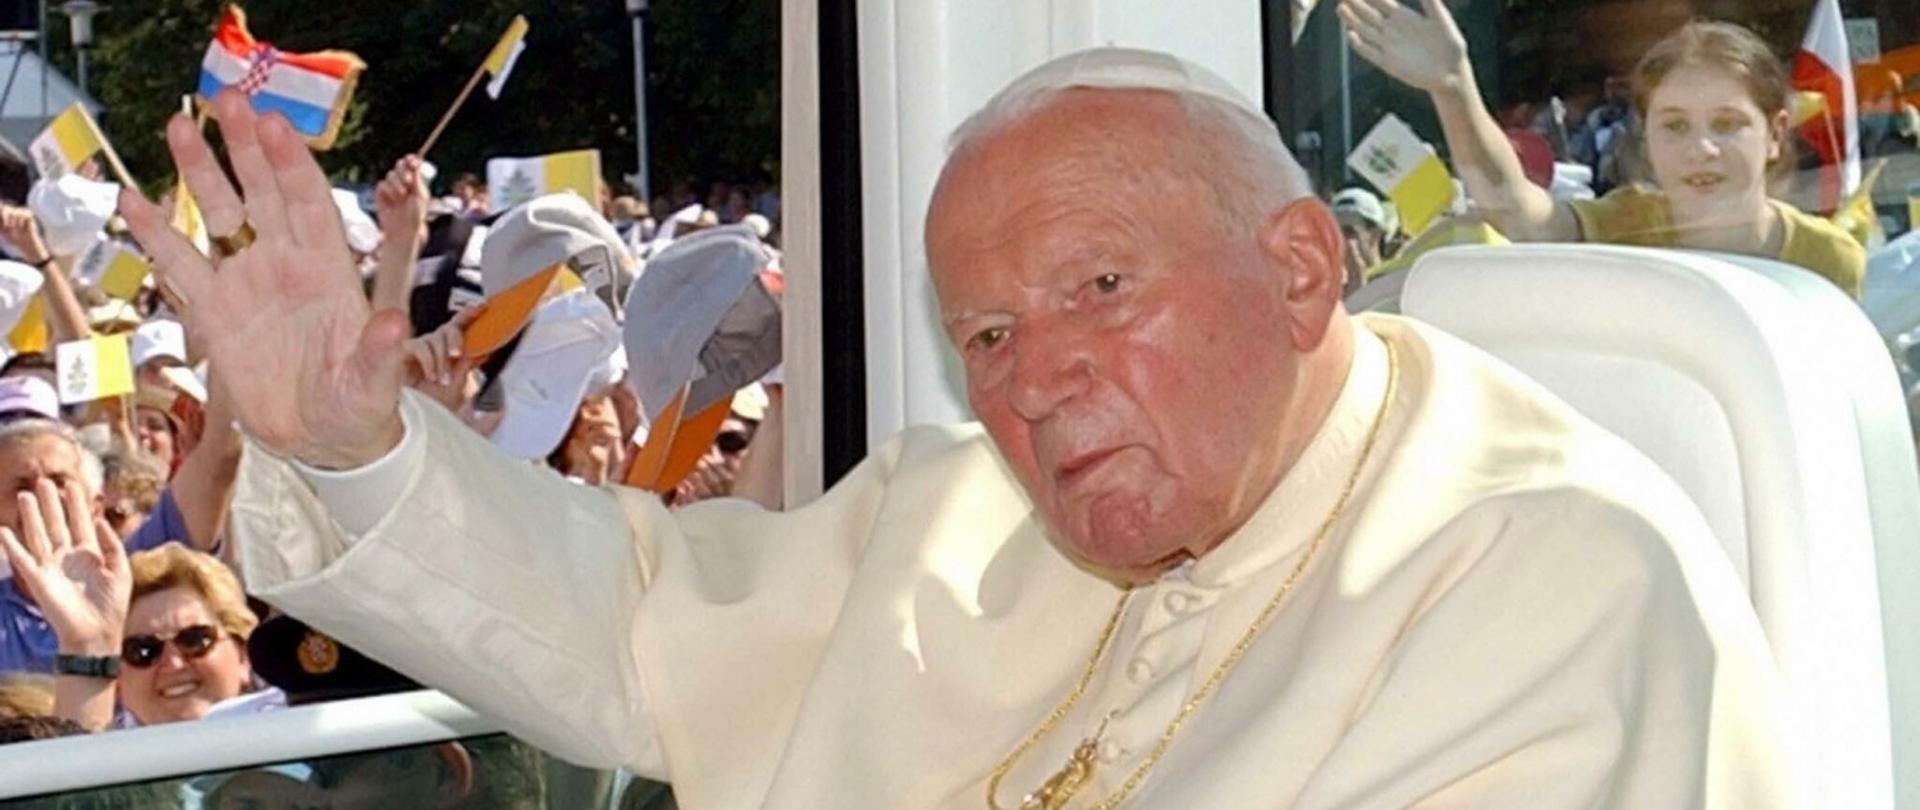 PHOTO: EAST NEWS/AFP
Pope John Paul II waves to faithful and pilgrims as he arrives in his popemobile for a mass celebration in Rijeka, Croatia, 08 June 2003. The Pope, on his 100th overseas trip, will tour Croatia until June 09.